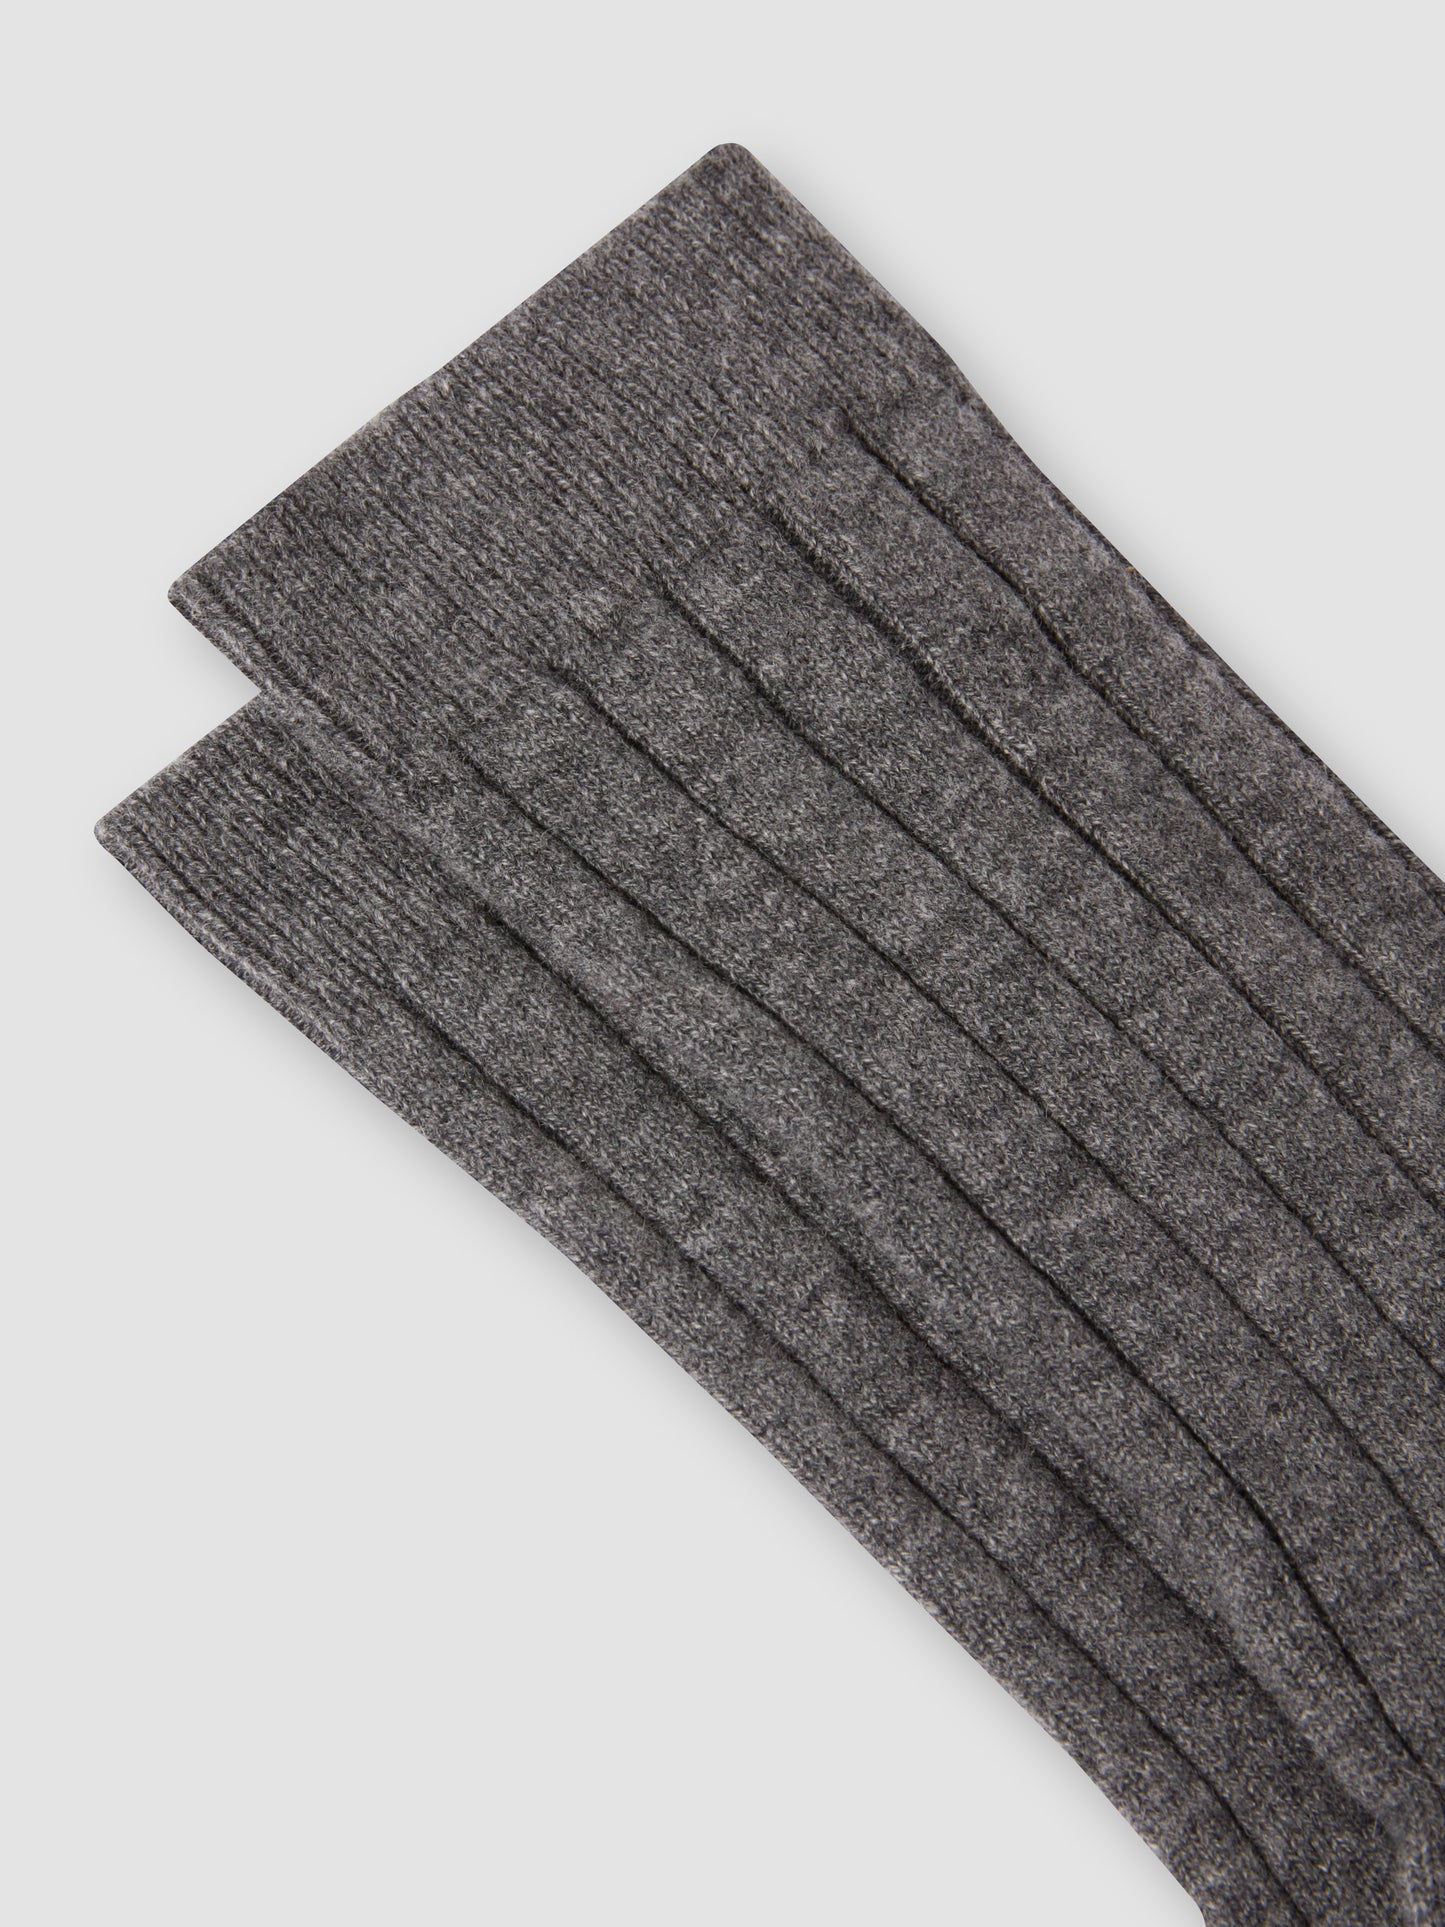 Cashmere Knitted Socks Charcoal Product Image Detail